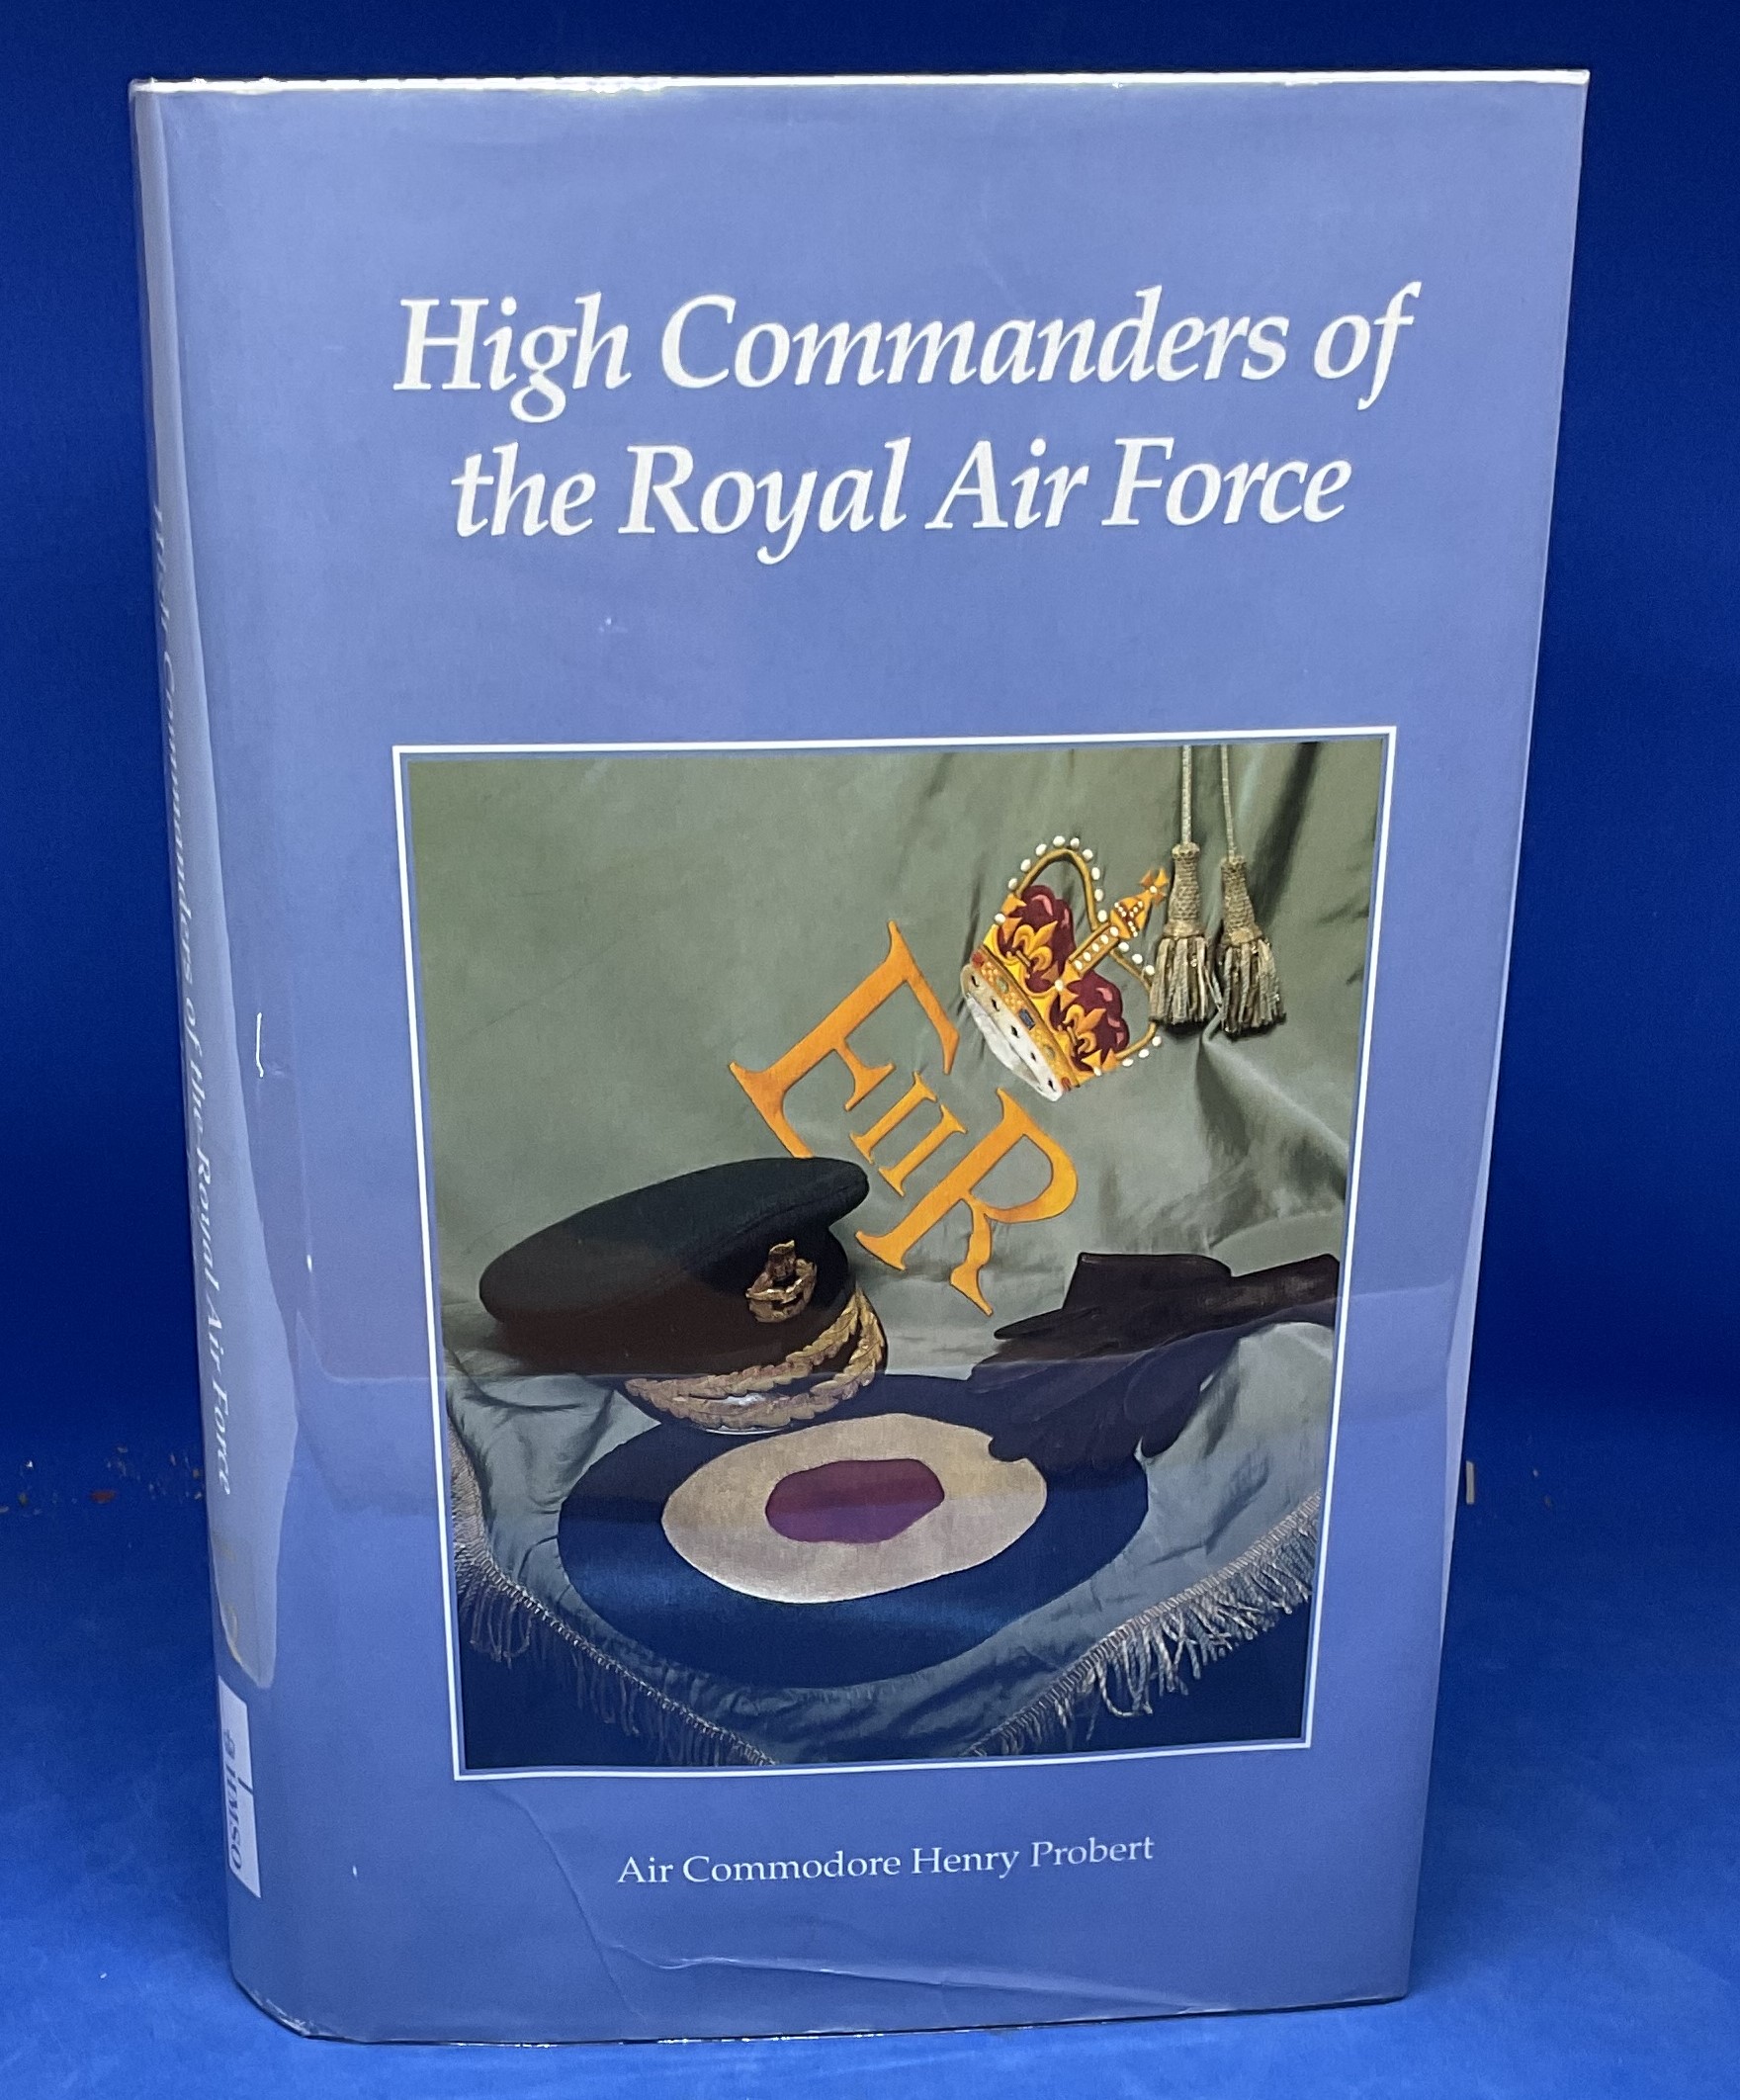 Air Commodore Henry Probert Multi Signed First Day Covers in a book album of High Commanders of